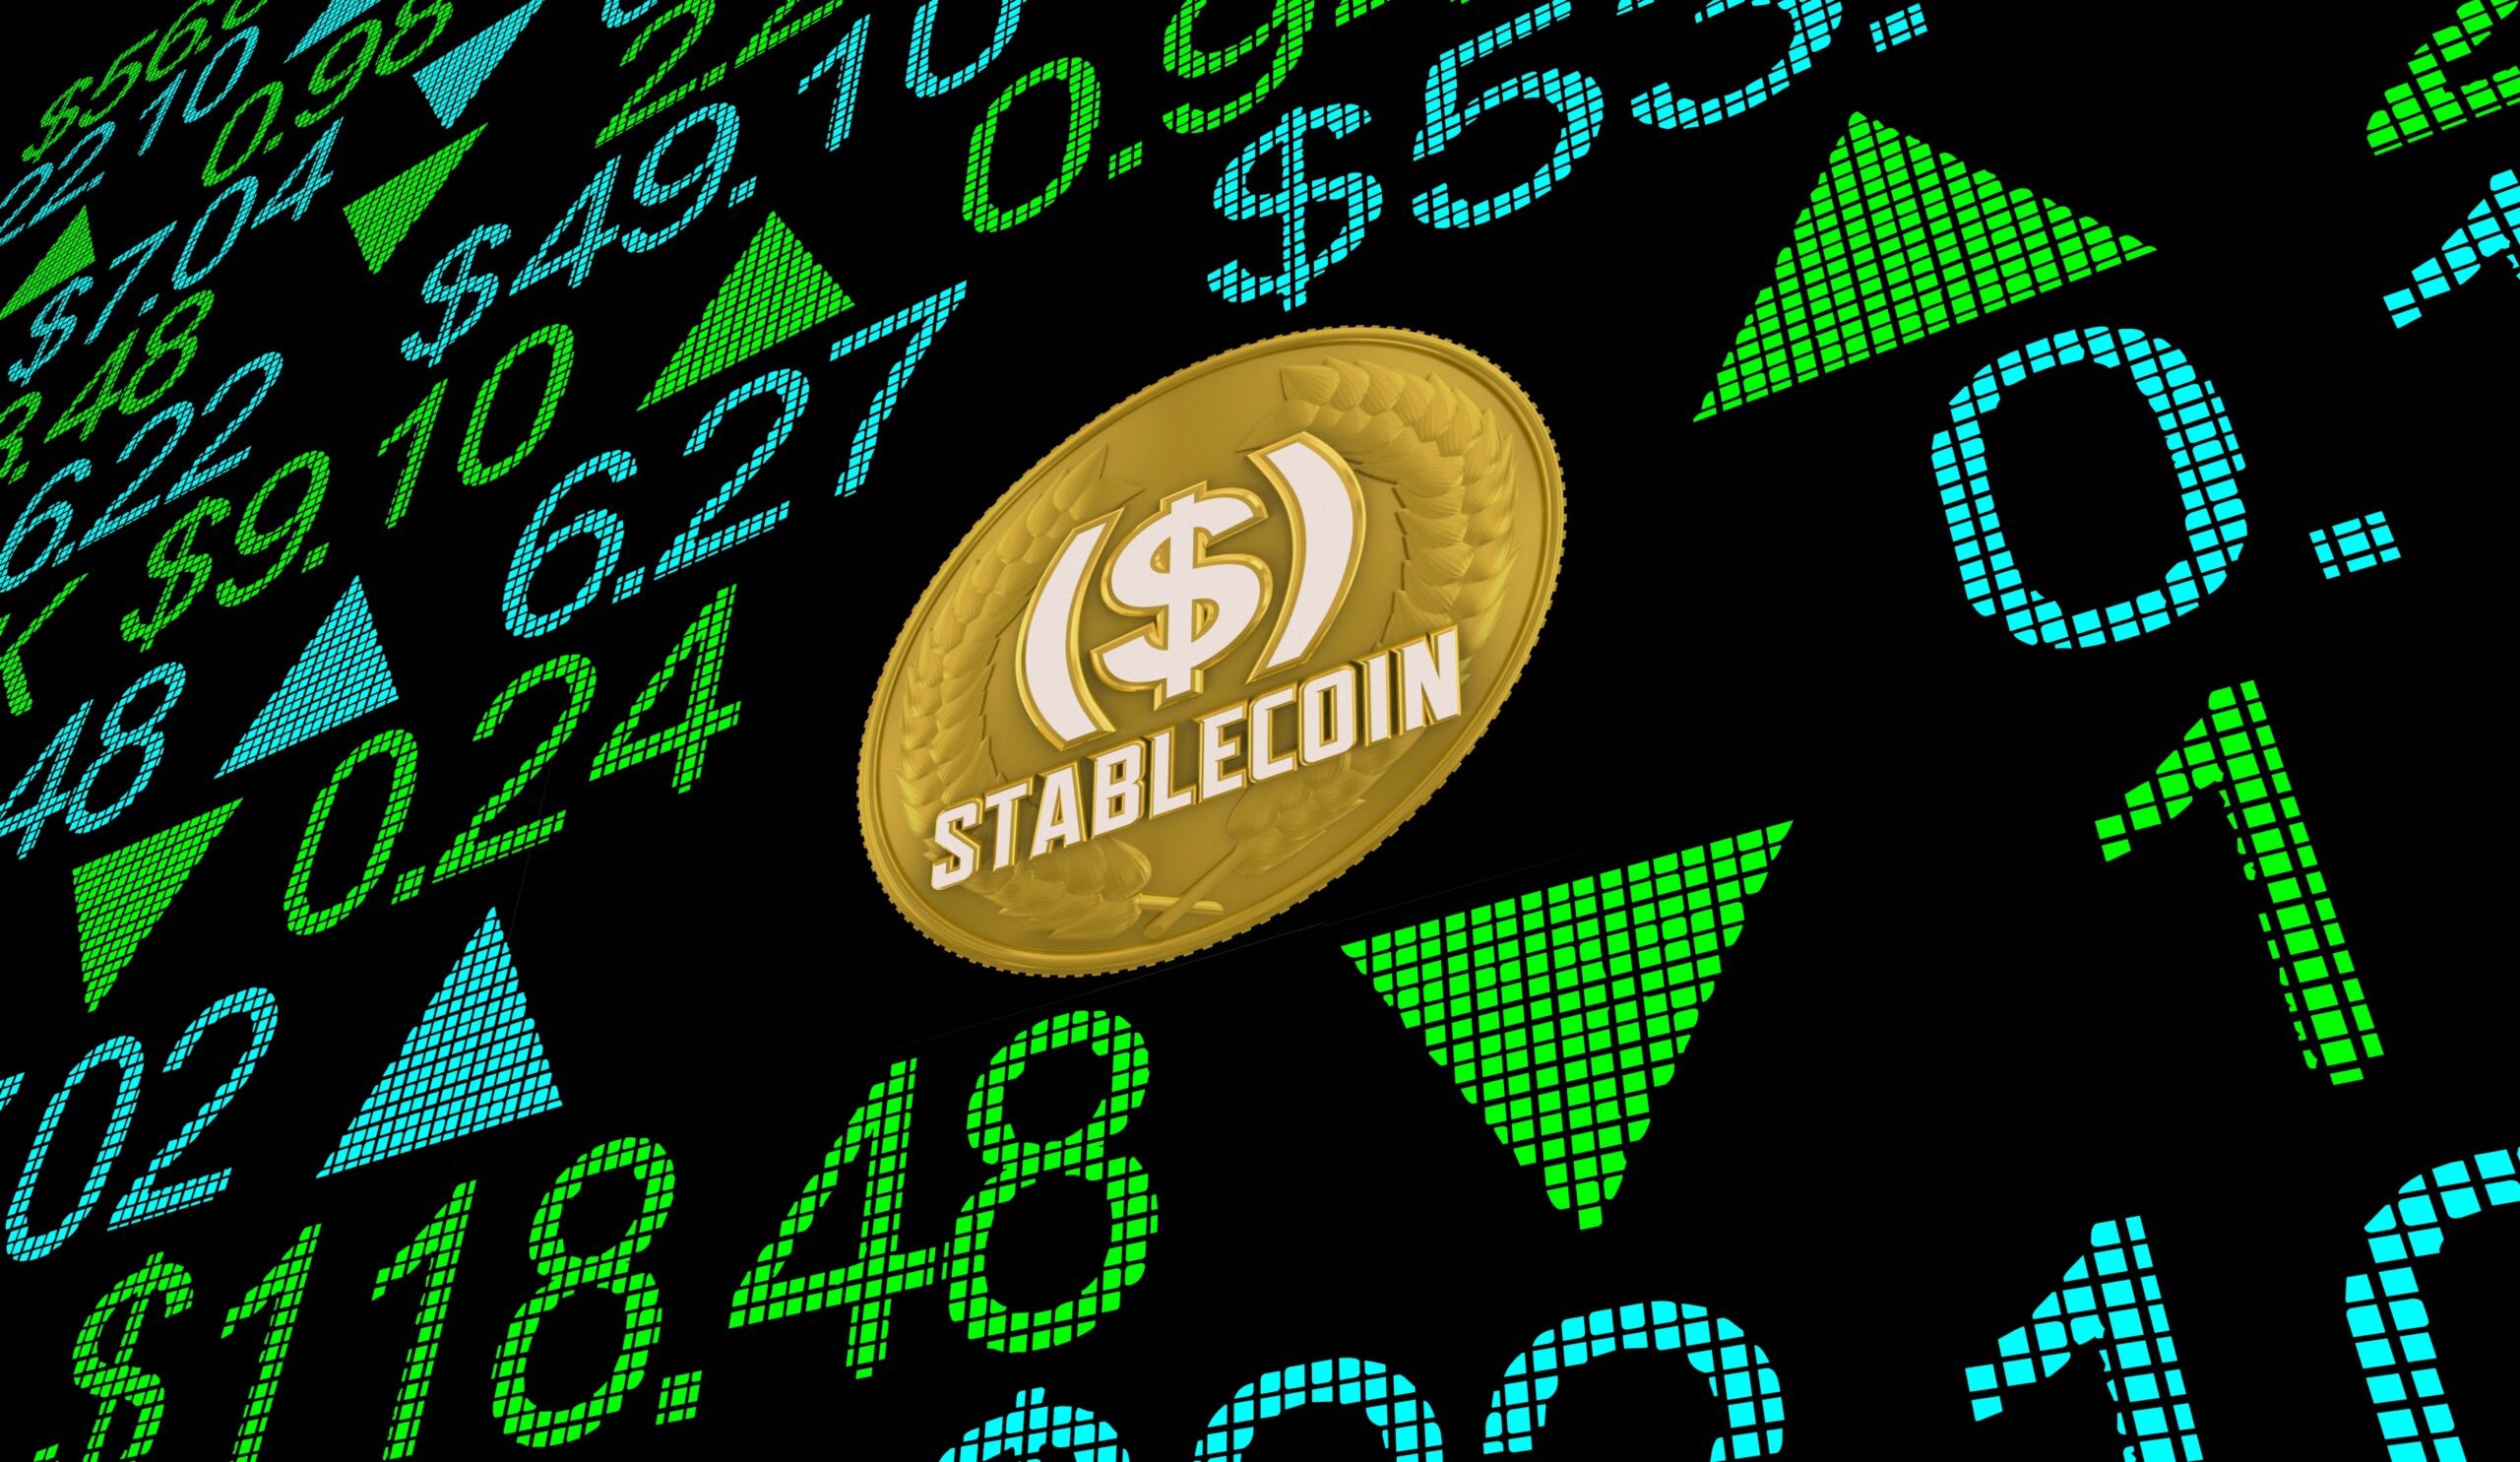 TerraUSD collapse highlights volatile nature of algorithmic stablecoins